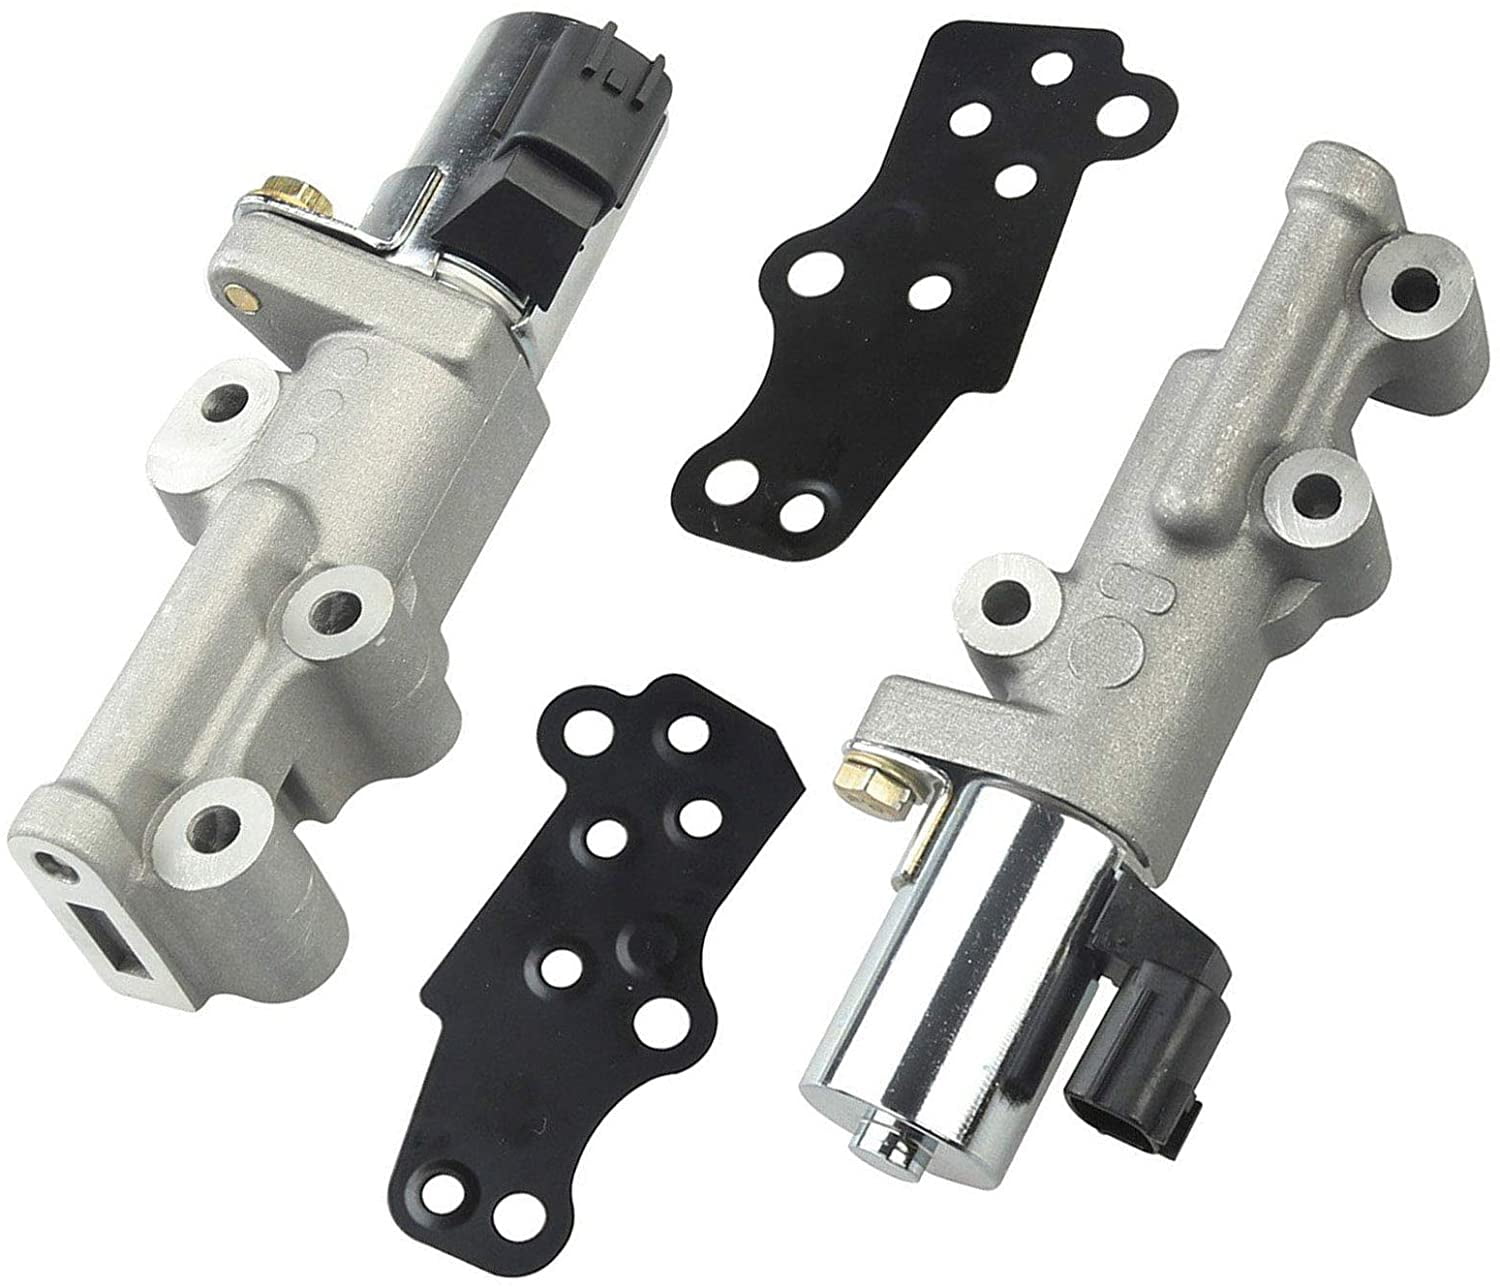 BLACKHORSE-RACING Left & Right Engine Variable Valve Timing VVT Control Solenoid for 2001-2004 Infinity & Nissan 